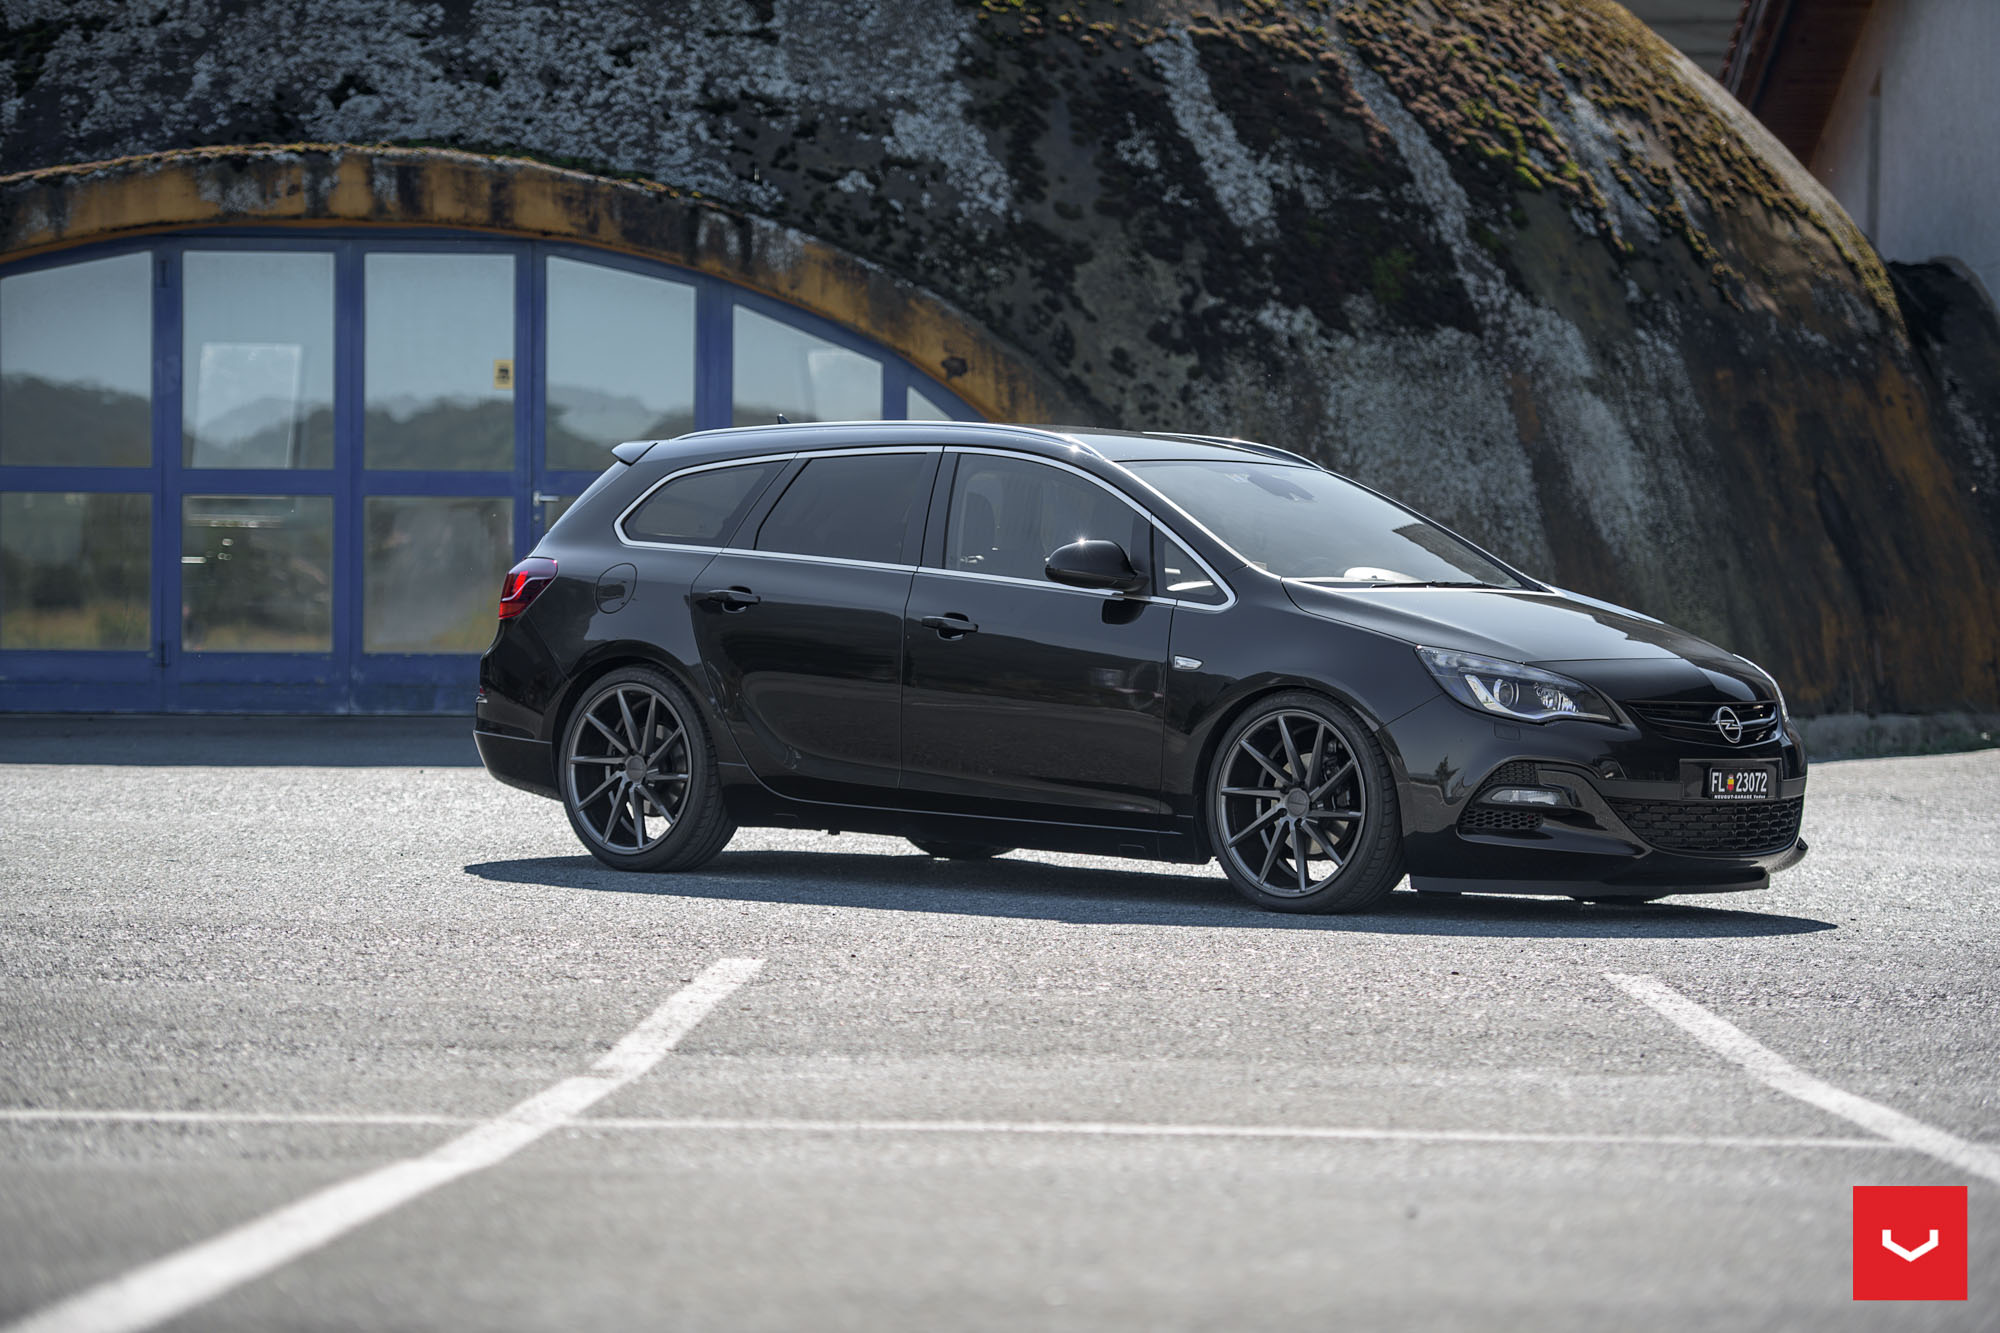 Opel Astra J Wagon Doubles Its Value With Vossen CVT Wheels - autoevolution